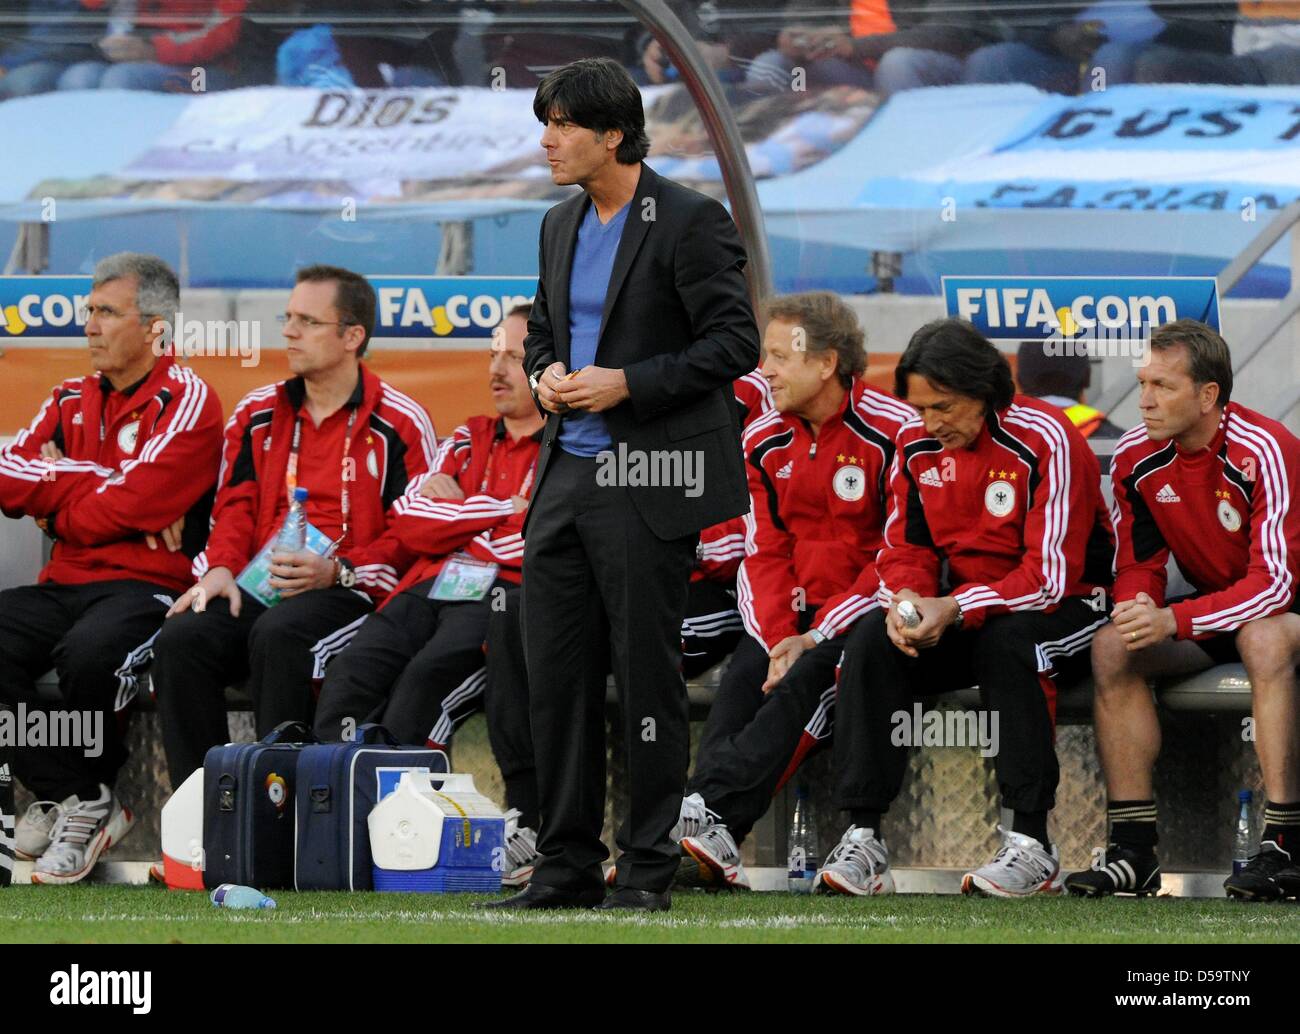 German coach Joachim Loew during the 2010 FIFA World Cup quarterfinal match between Argentina and Germany at the Green Point Stadium in Cape Town, South Africa 03 July 2010. Germany won 4-0. Photo: Marcus Brandt dpa - Please refer to http://dpaq.de/FIFA-WM2010-TC Stock Photo